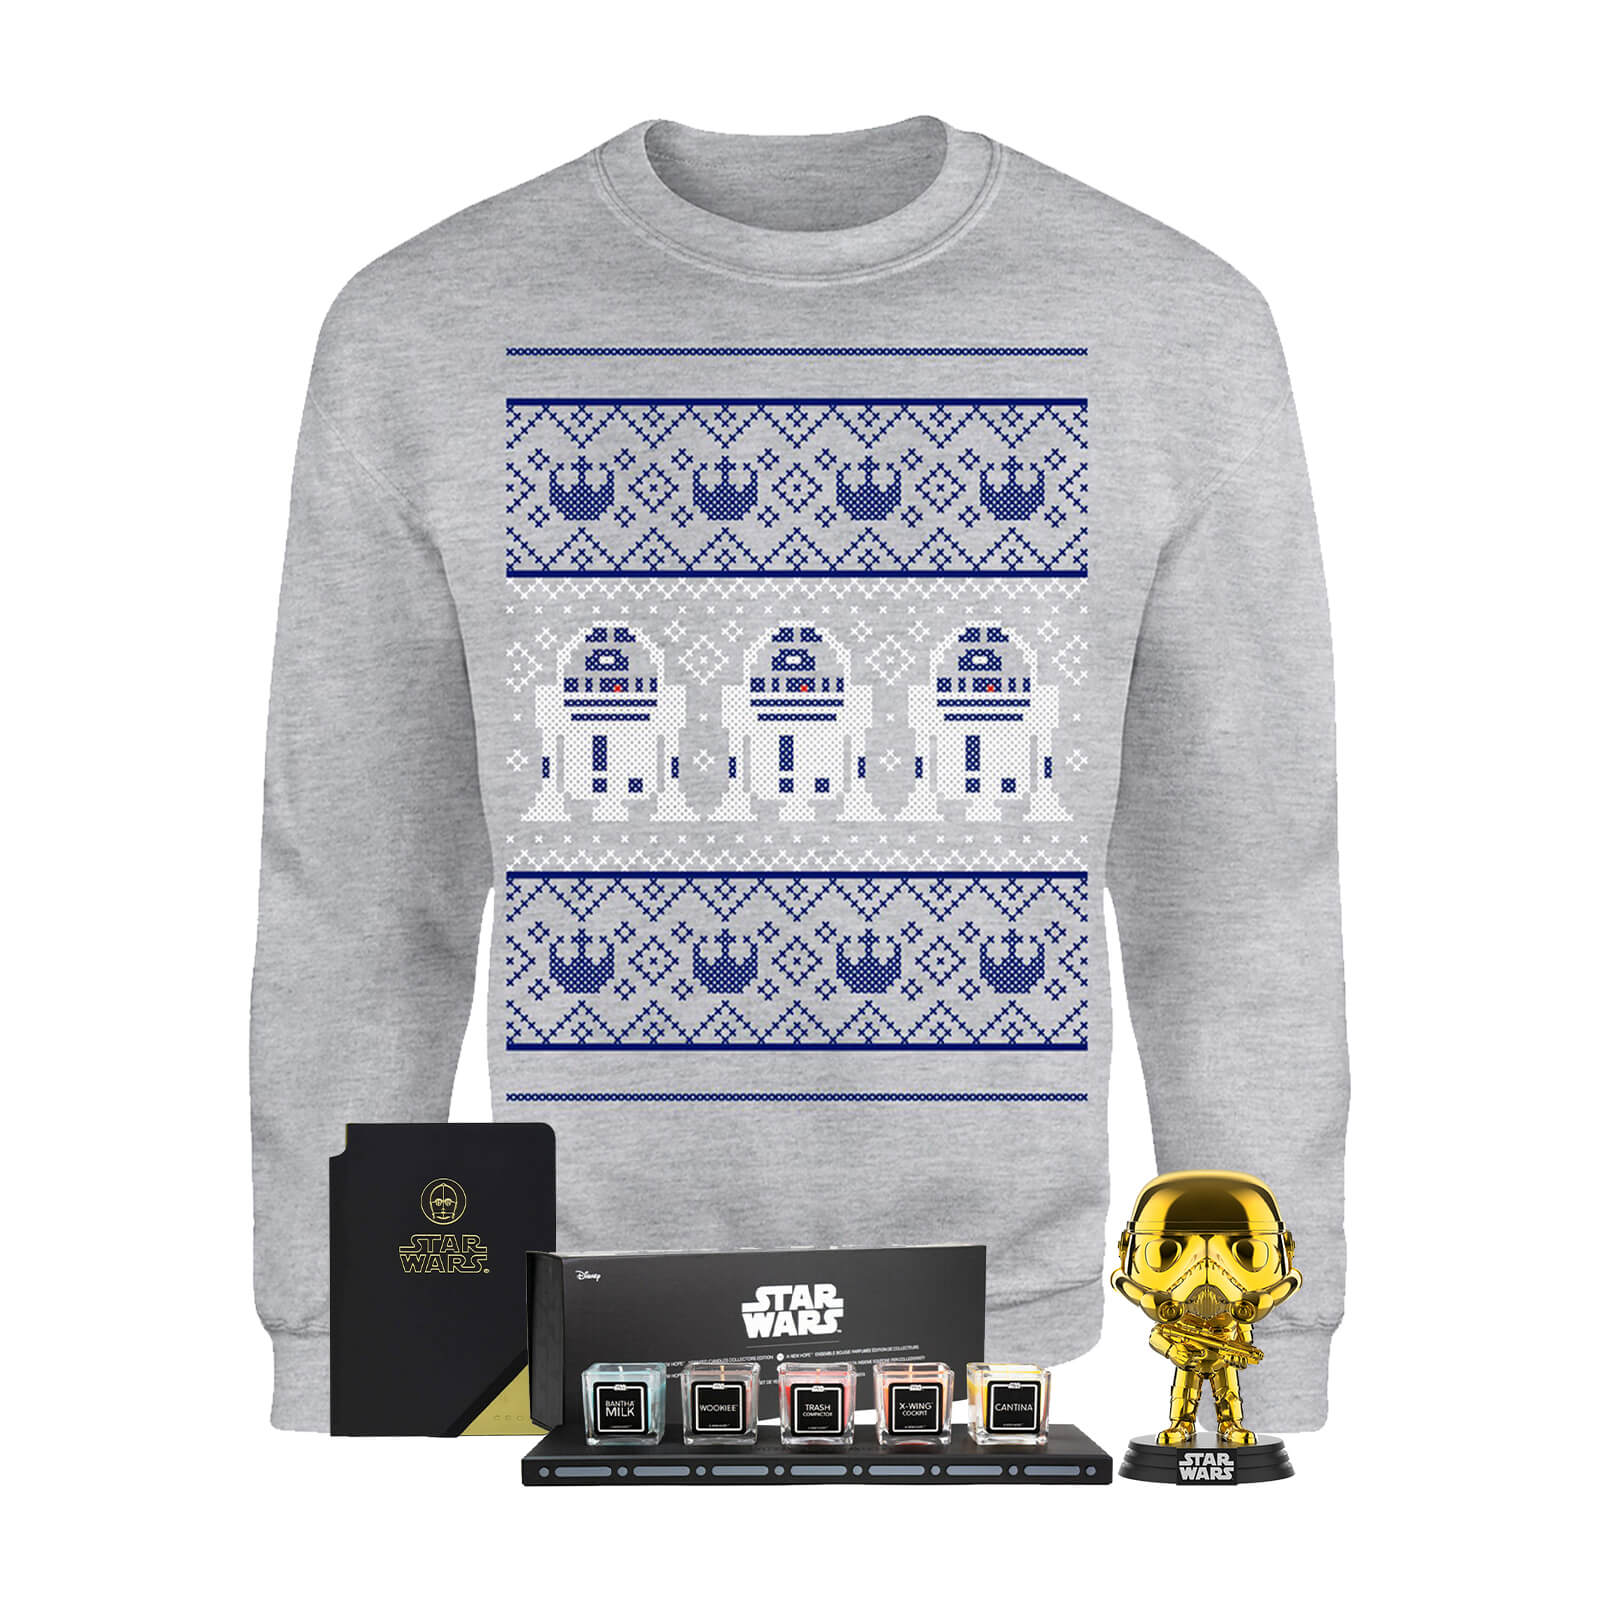 Star Wars Officially Licensed MEGA Christmas Gift Set - Includes Christmas Sweatshirt plus 3 gifts - XL